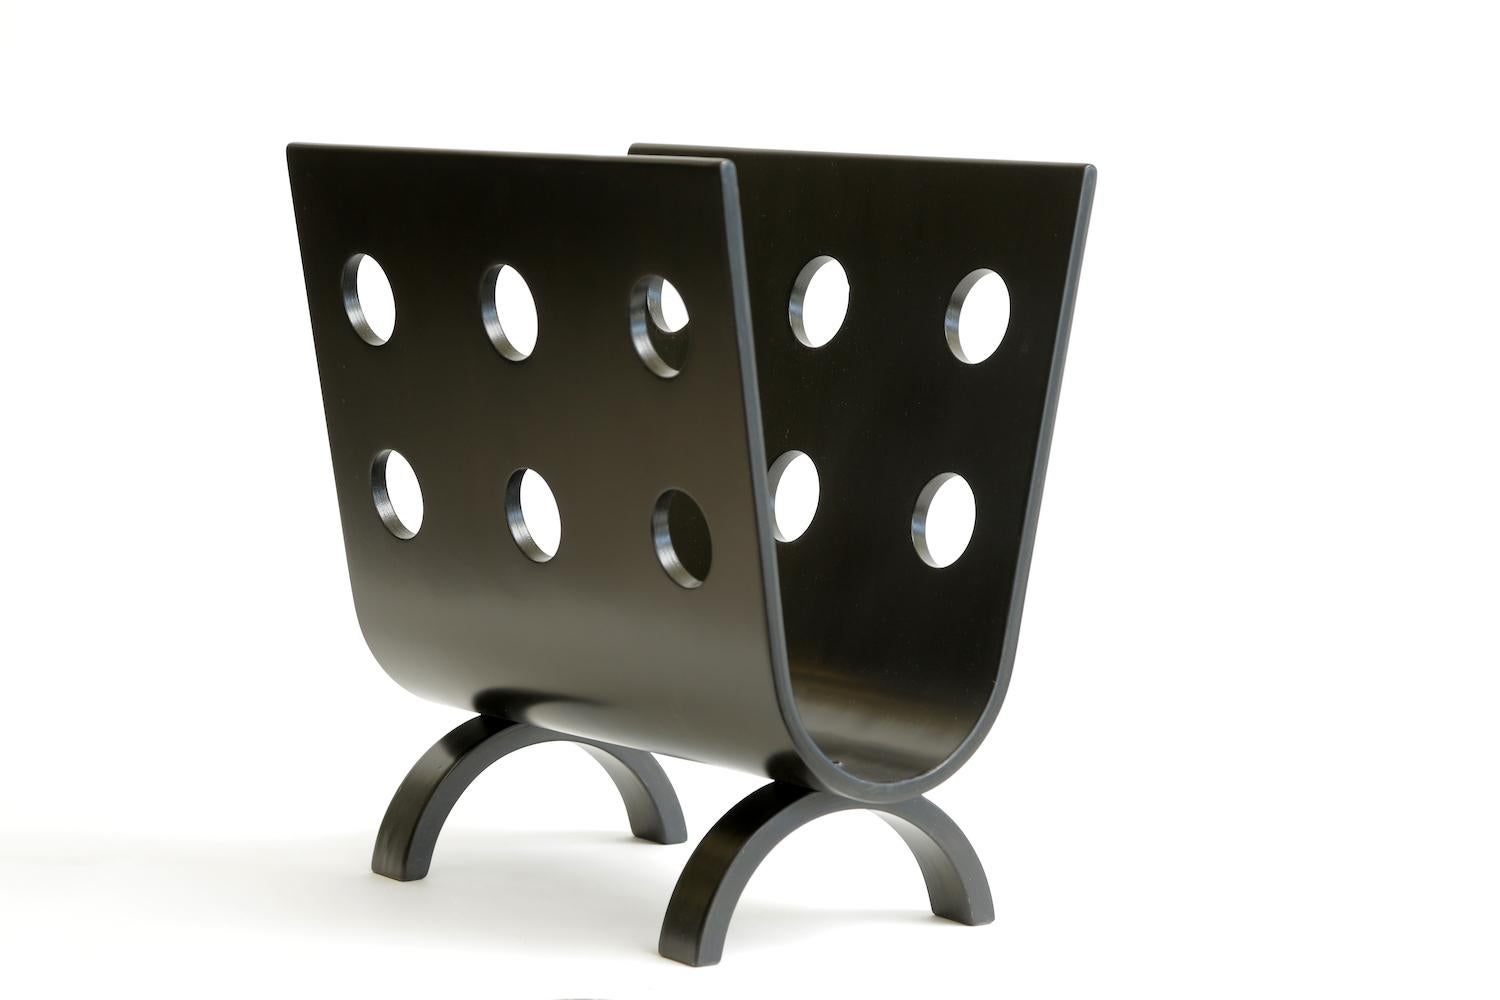 This fabulous and very uncommon Mid-Century Modern bentwood magazine stand or rack is from the 1950s. It is stained black from how it was acquired. The cutout holes are so very modern now as they were then. It is a beauty and winner on all levels.